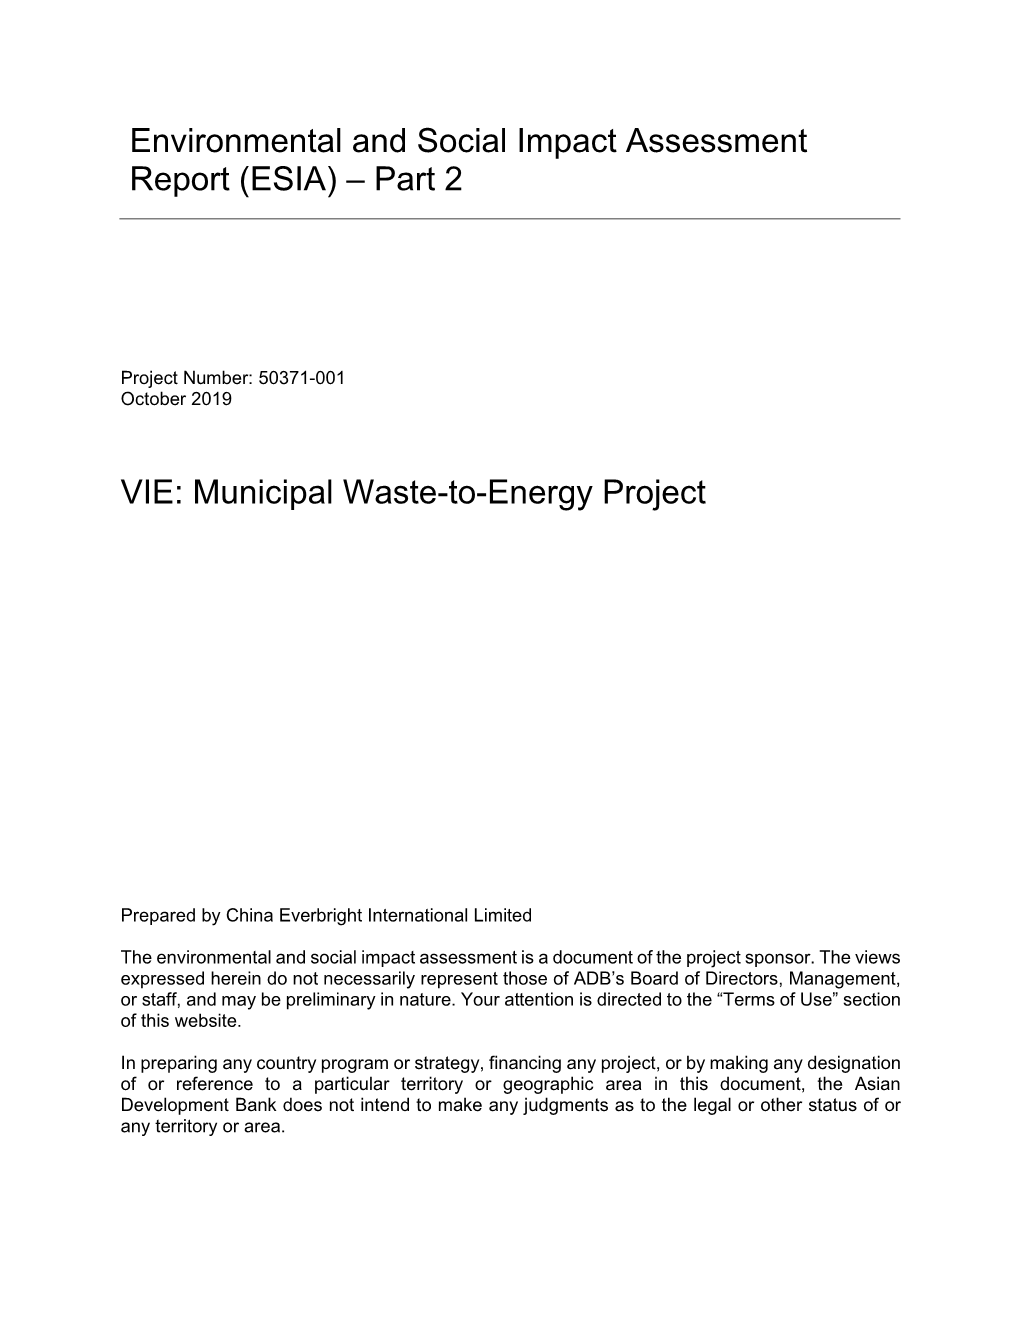 50371-001: Municipal Waste to Energy Project